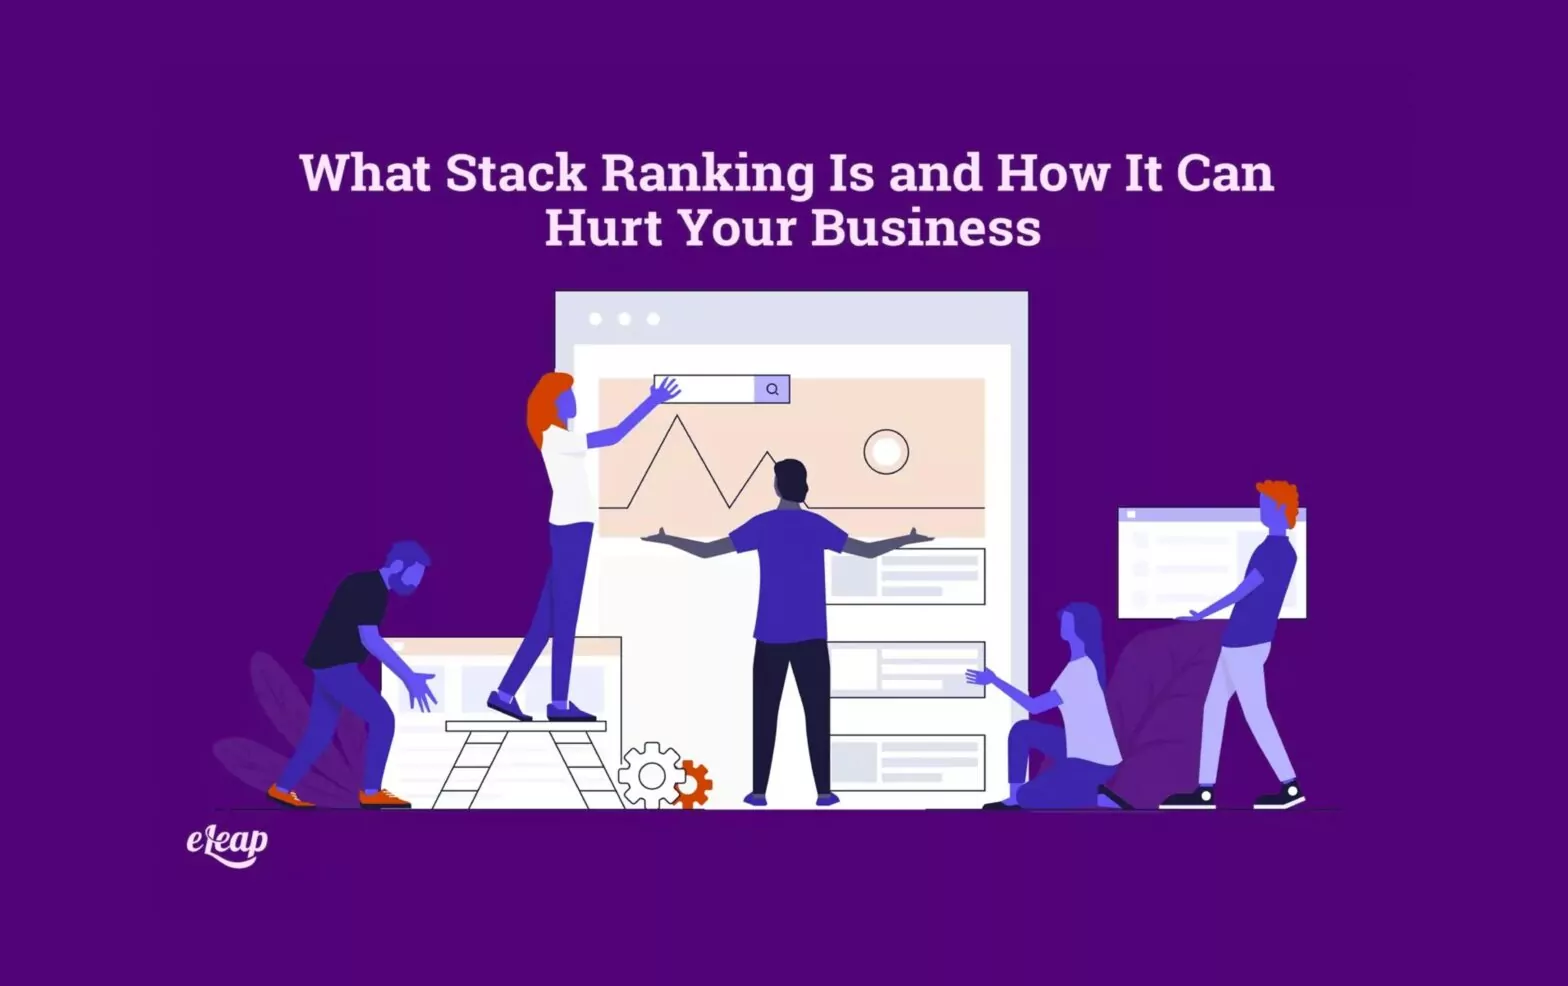 What Stack Ranking Is and How It Can Hurt Your Business